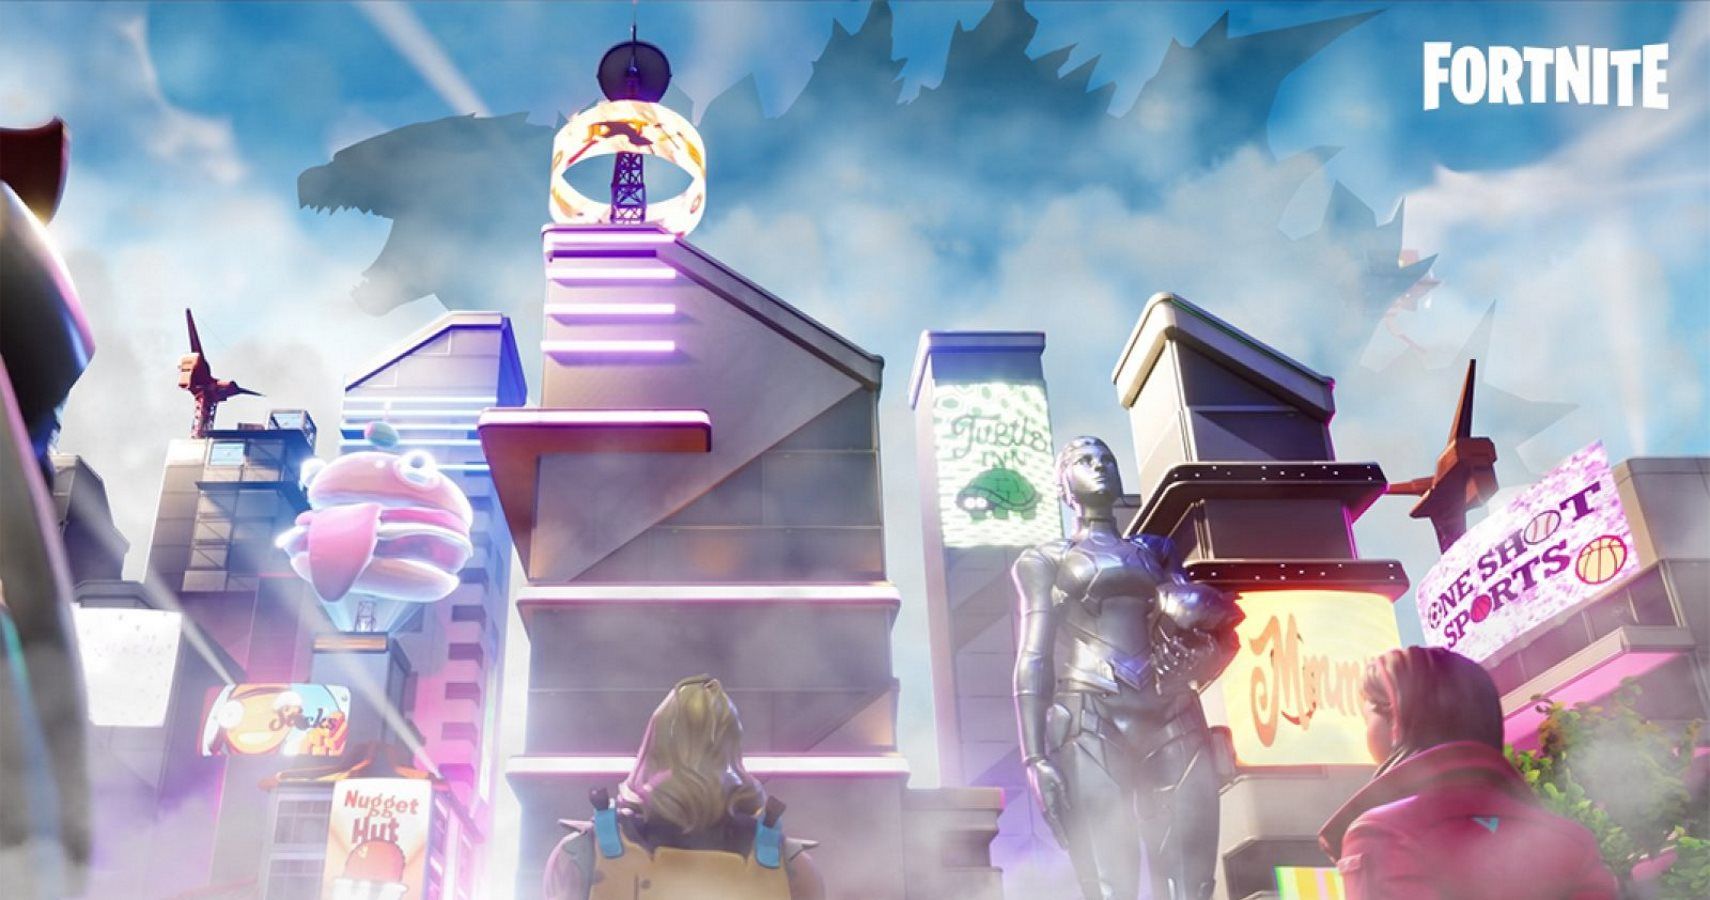 Fortnite Might Be Stealing The Godzilla Event From PUBG